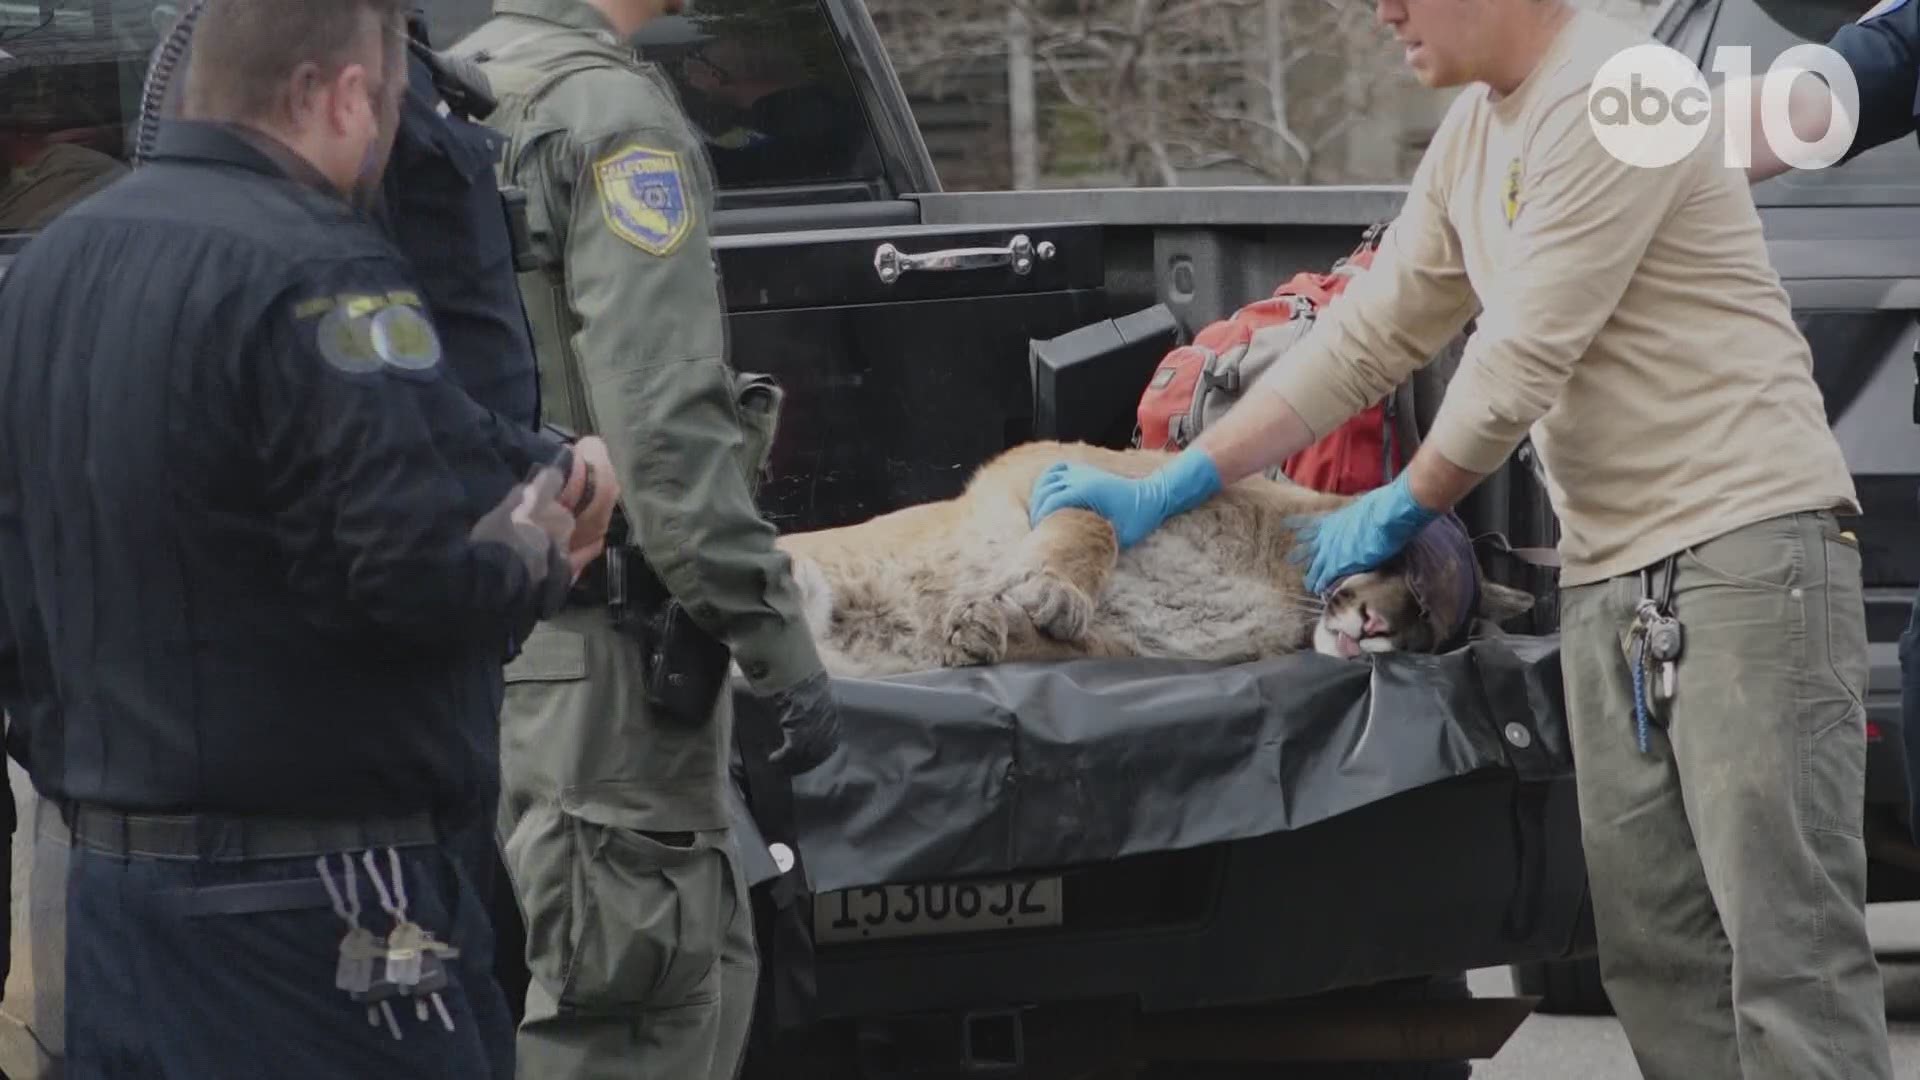 A mountain lion caught roaming in a Natomas neighborhood sparked heavy conversation on Sunday, Feb. 24. The cat was tranquilized and captured and is set to be released in the wild.